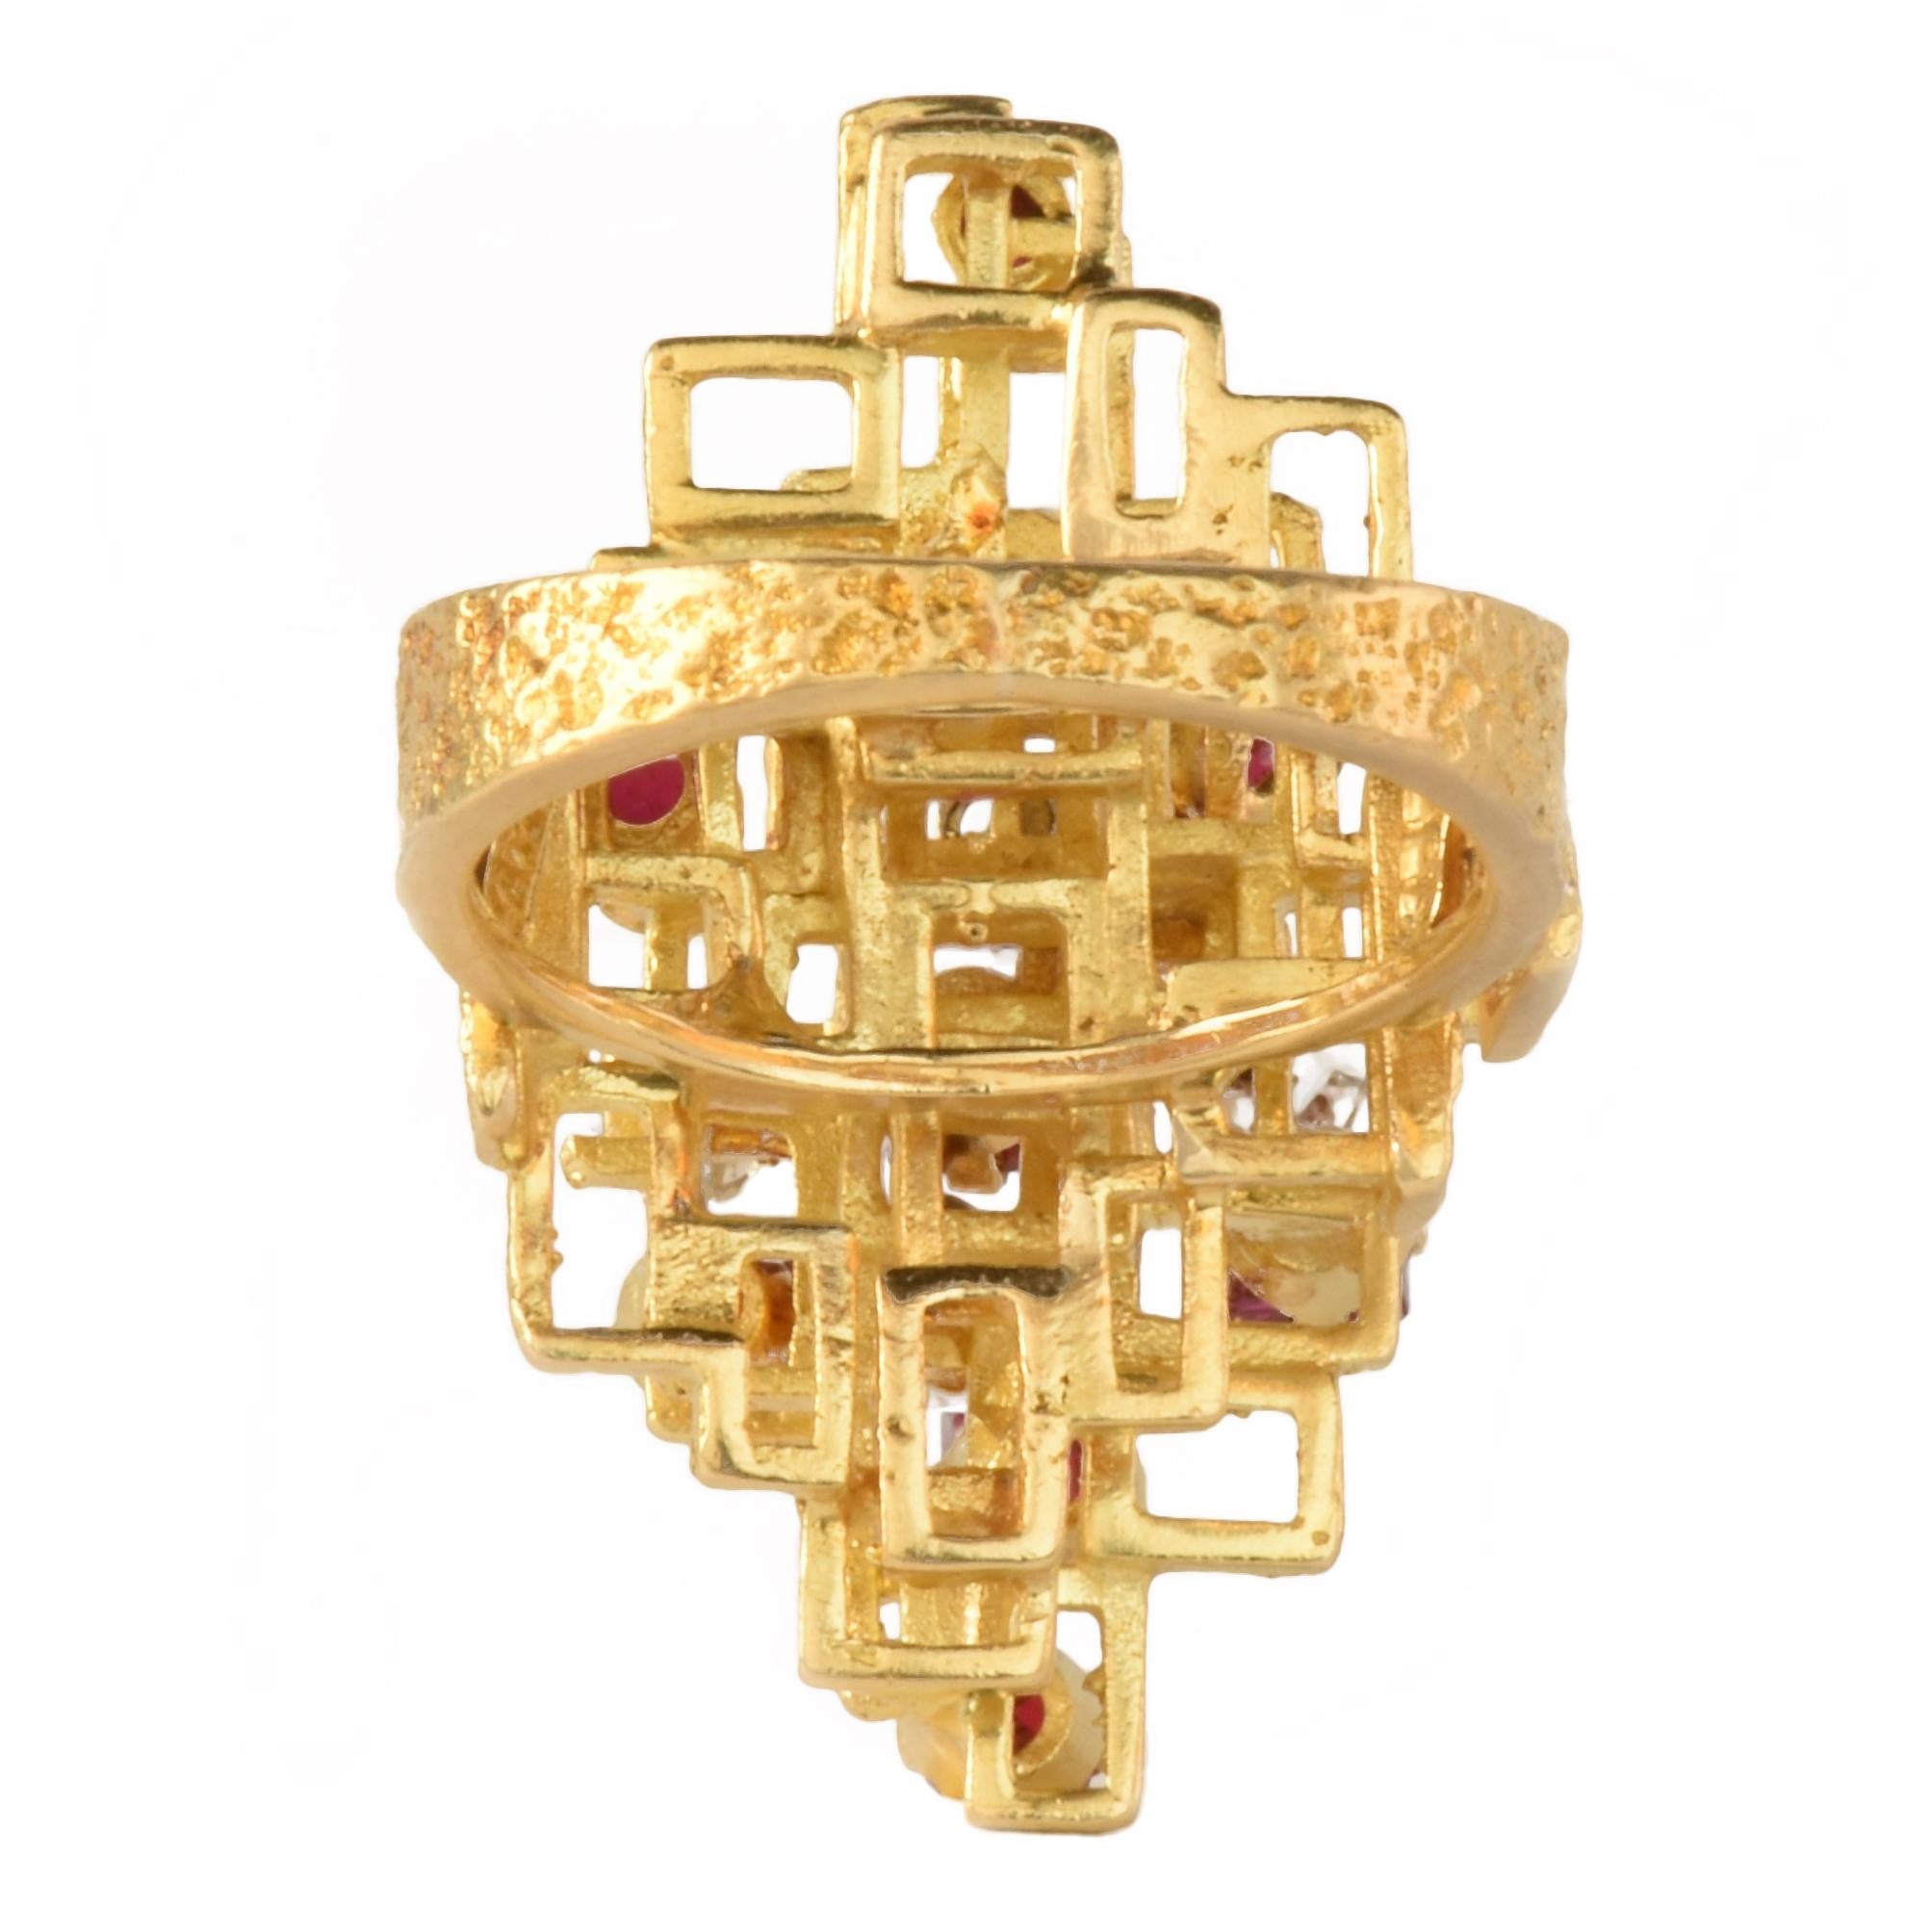 A fabulous vintage statement ring.

Designed as a series of bark textured rectangles in 18k yellow gold.

Set with square step cut rubies and round brilliant cut diamonds.

Attributed to George Weil. A similar example can be found in the collection